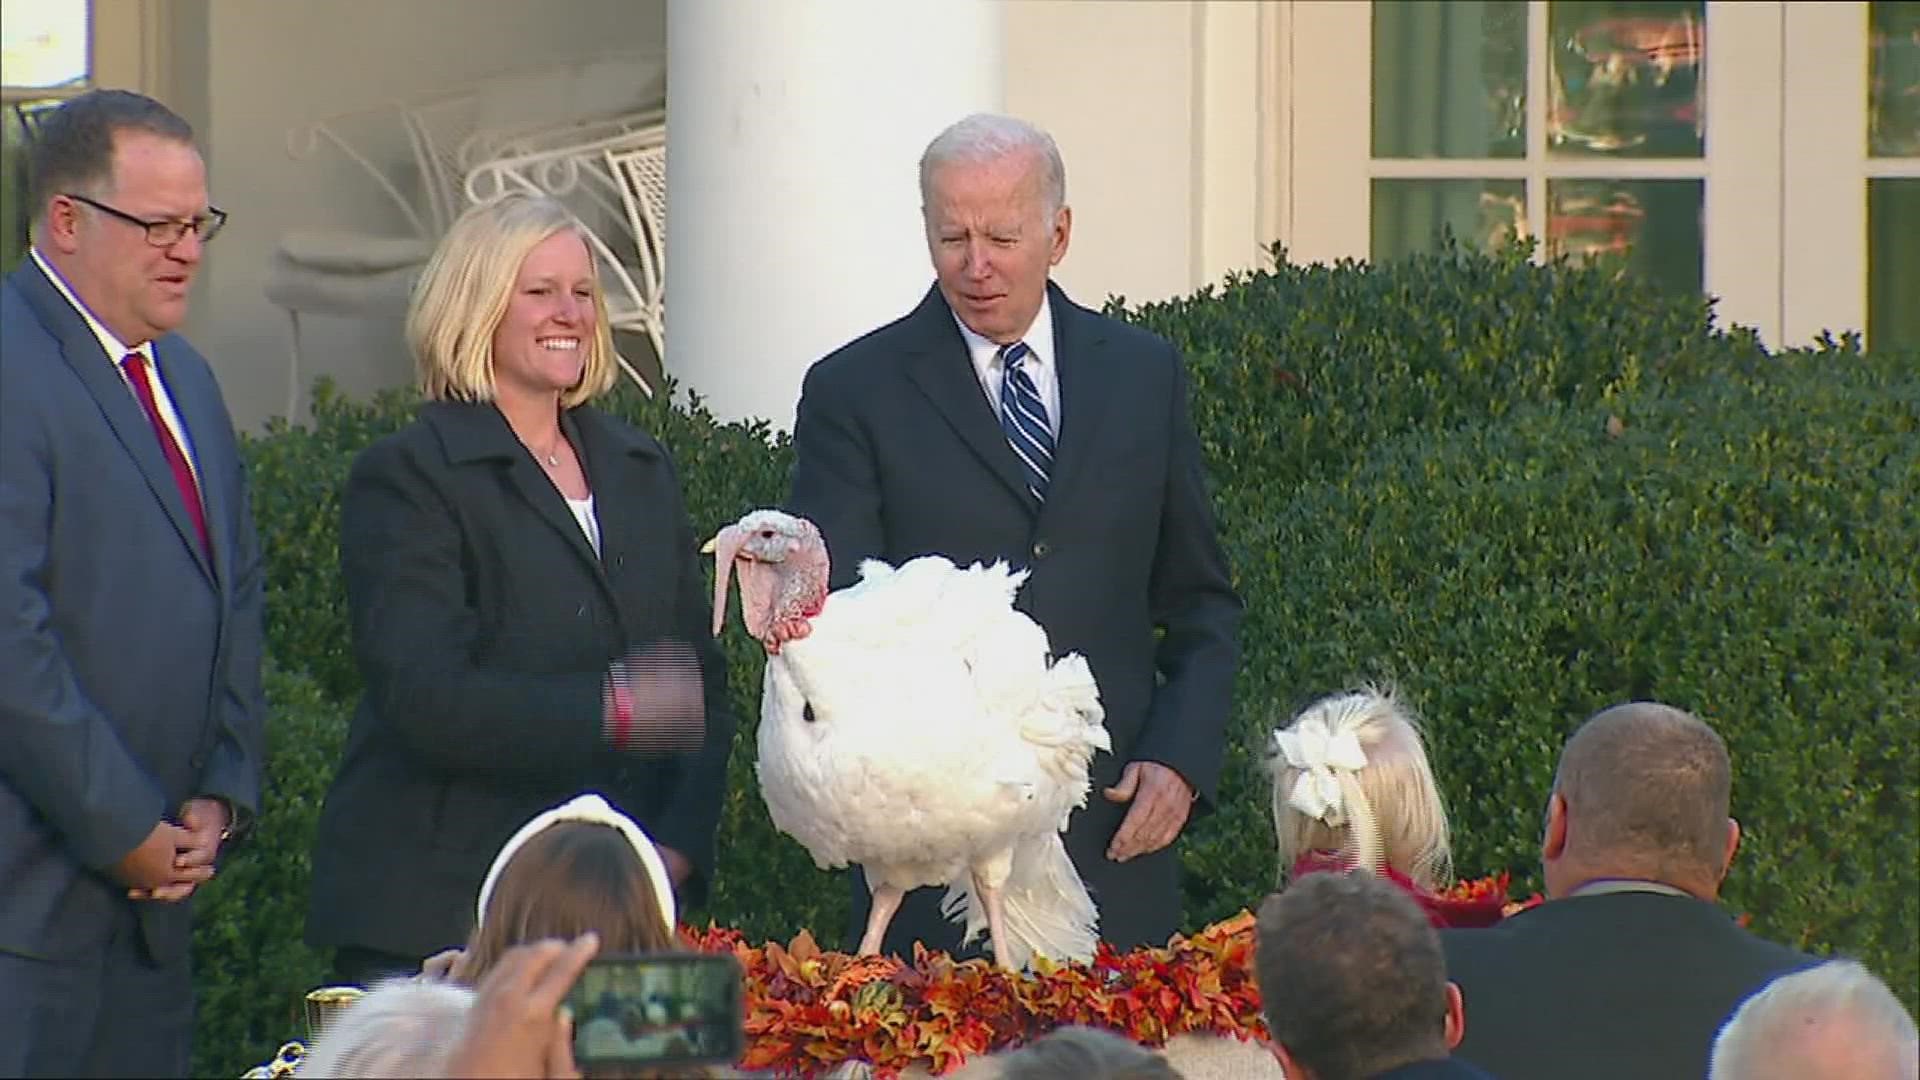 The turkeys will be pardoned during a ceremony in the White House Rose Garden Friday.